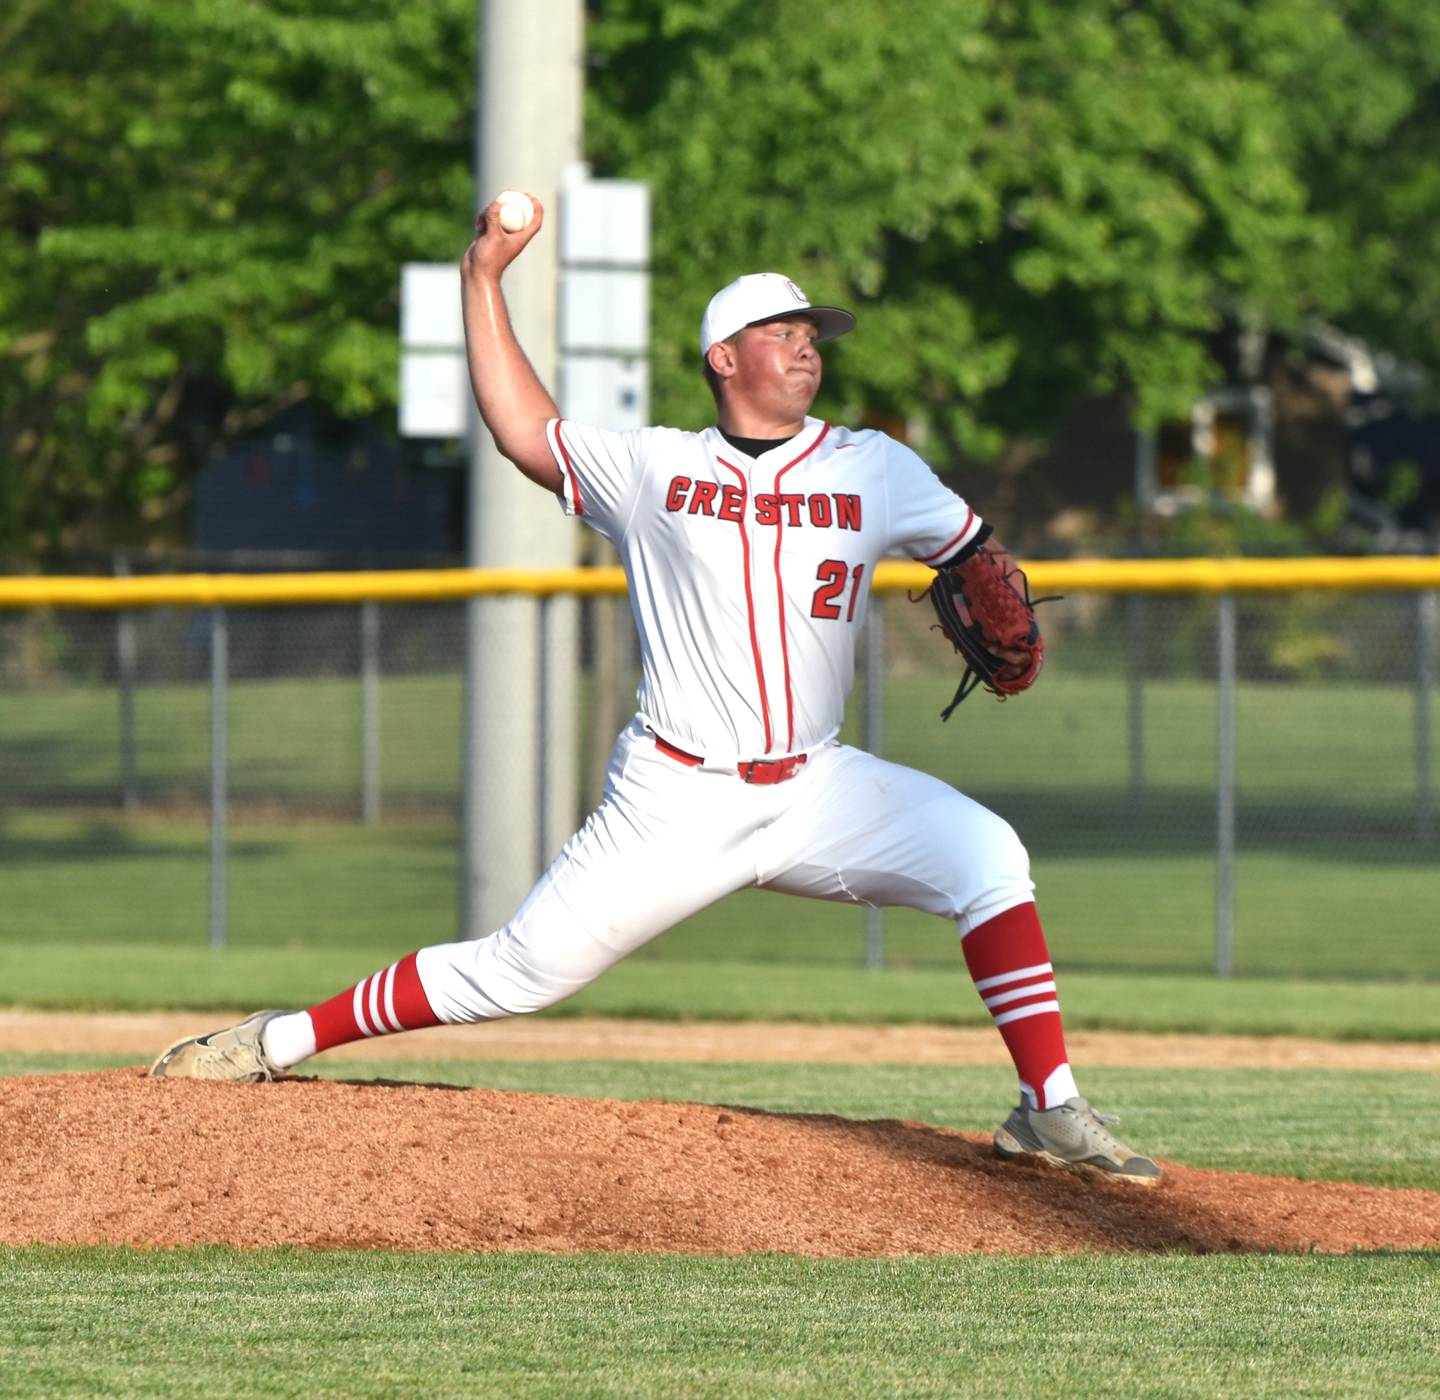 Quinten Fuller throws a pitch Monday at home against Indianola. Fuller pitched three innings, striking out one batter and allowing no runs in the 7-1 loss, their first of the season.